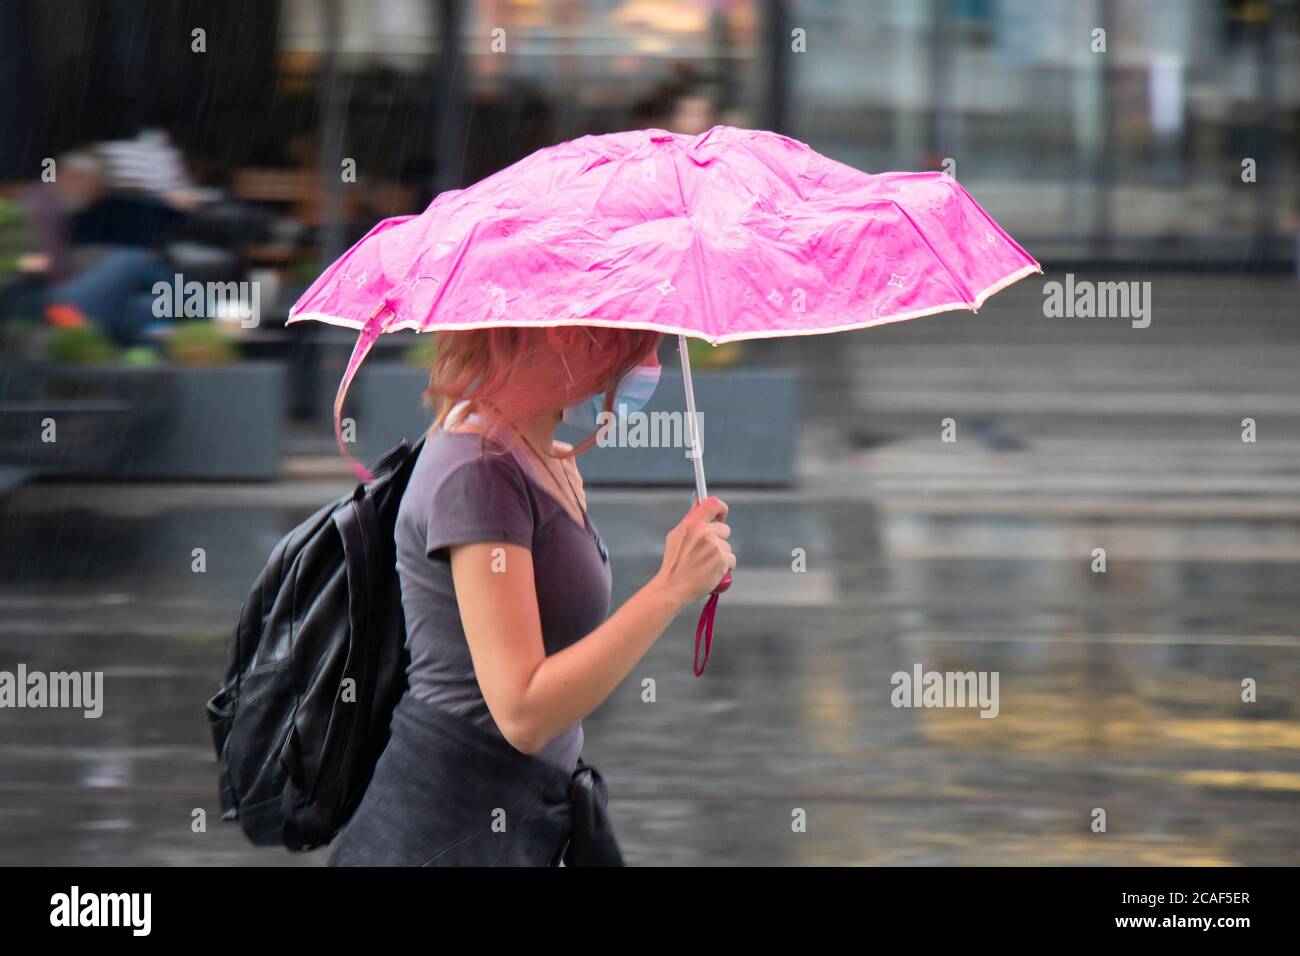 Belgrade, Serbia - August 5, 2020: Motion blur of young woman wearing face surgical mask walking fast under pink umbrella on a rainy summer day in the Stock Photo